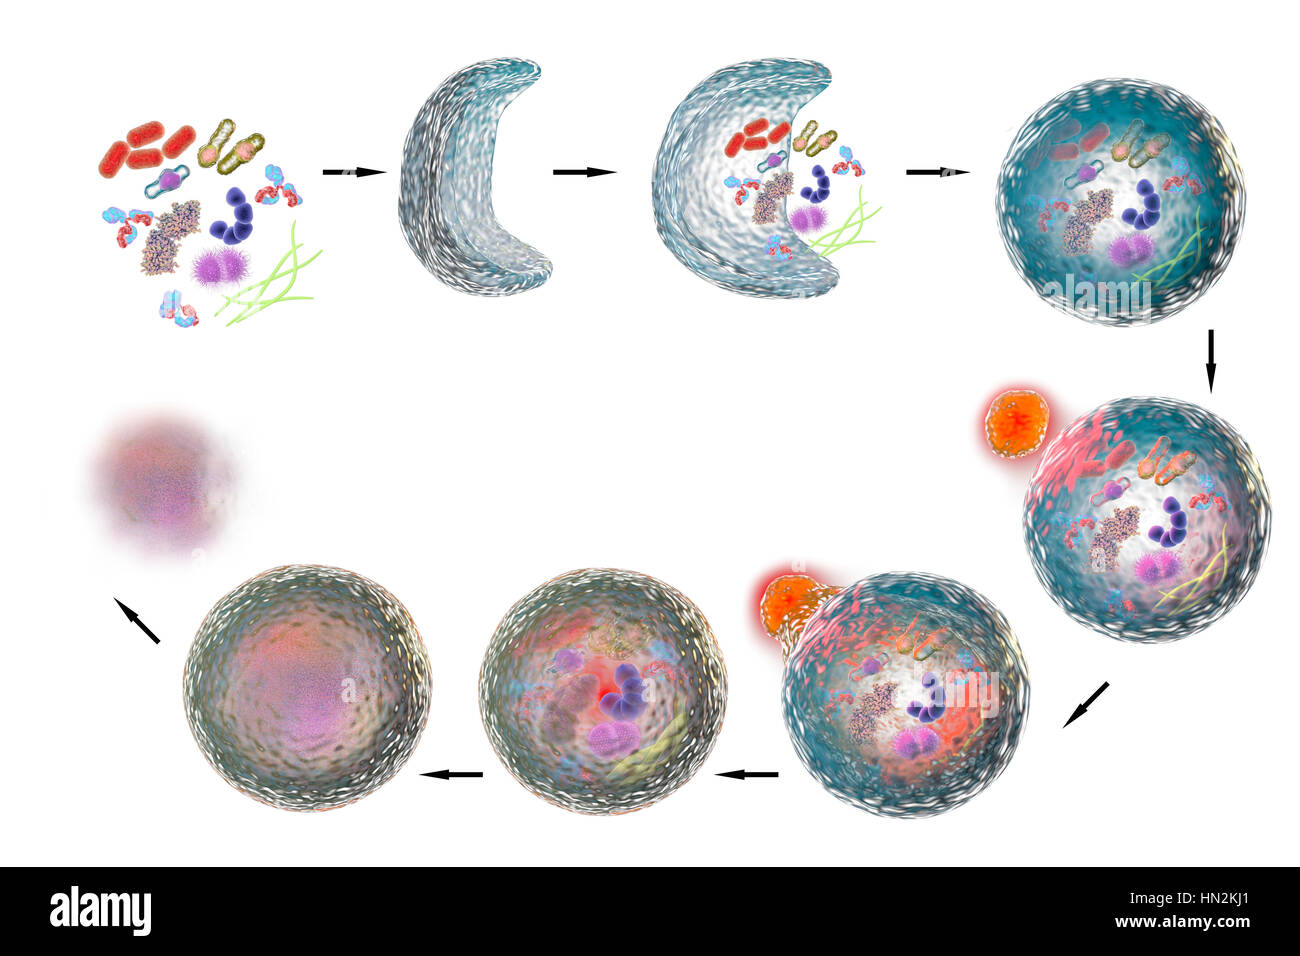 Autophagy,computer illustration.Autophagy (autophagocytosis) is natural mechanism that destroys unnecessary or dysfunctional cellular components recycles their materials.The stages of autophagy are shown clockwise from top left.First cellular components for degradation are collected together.The Stock Photo